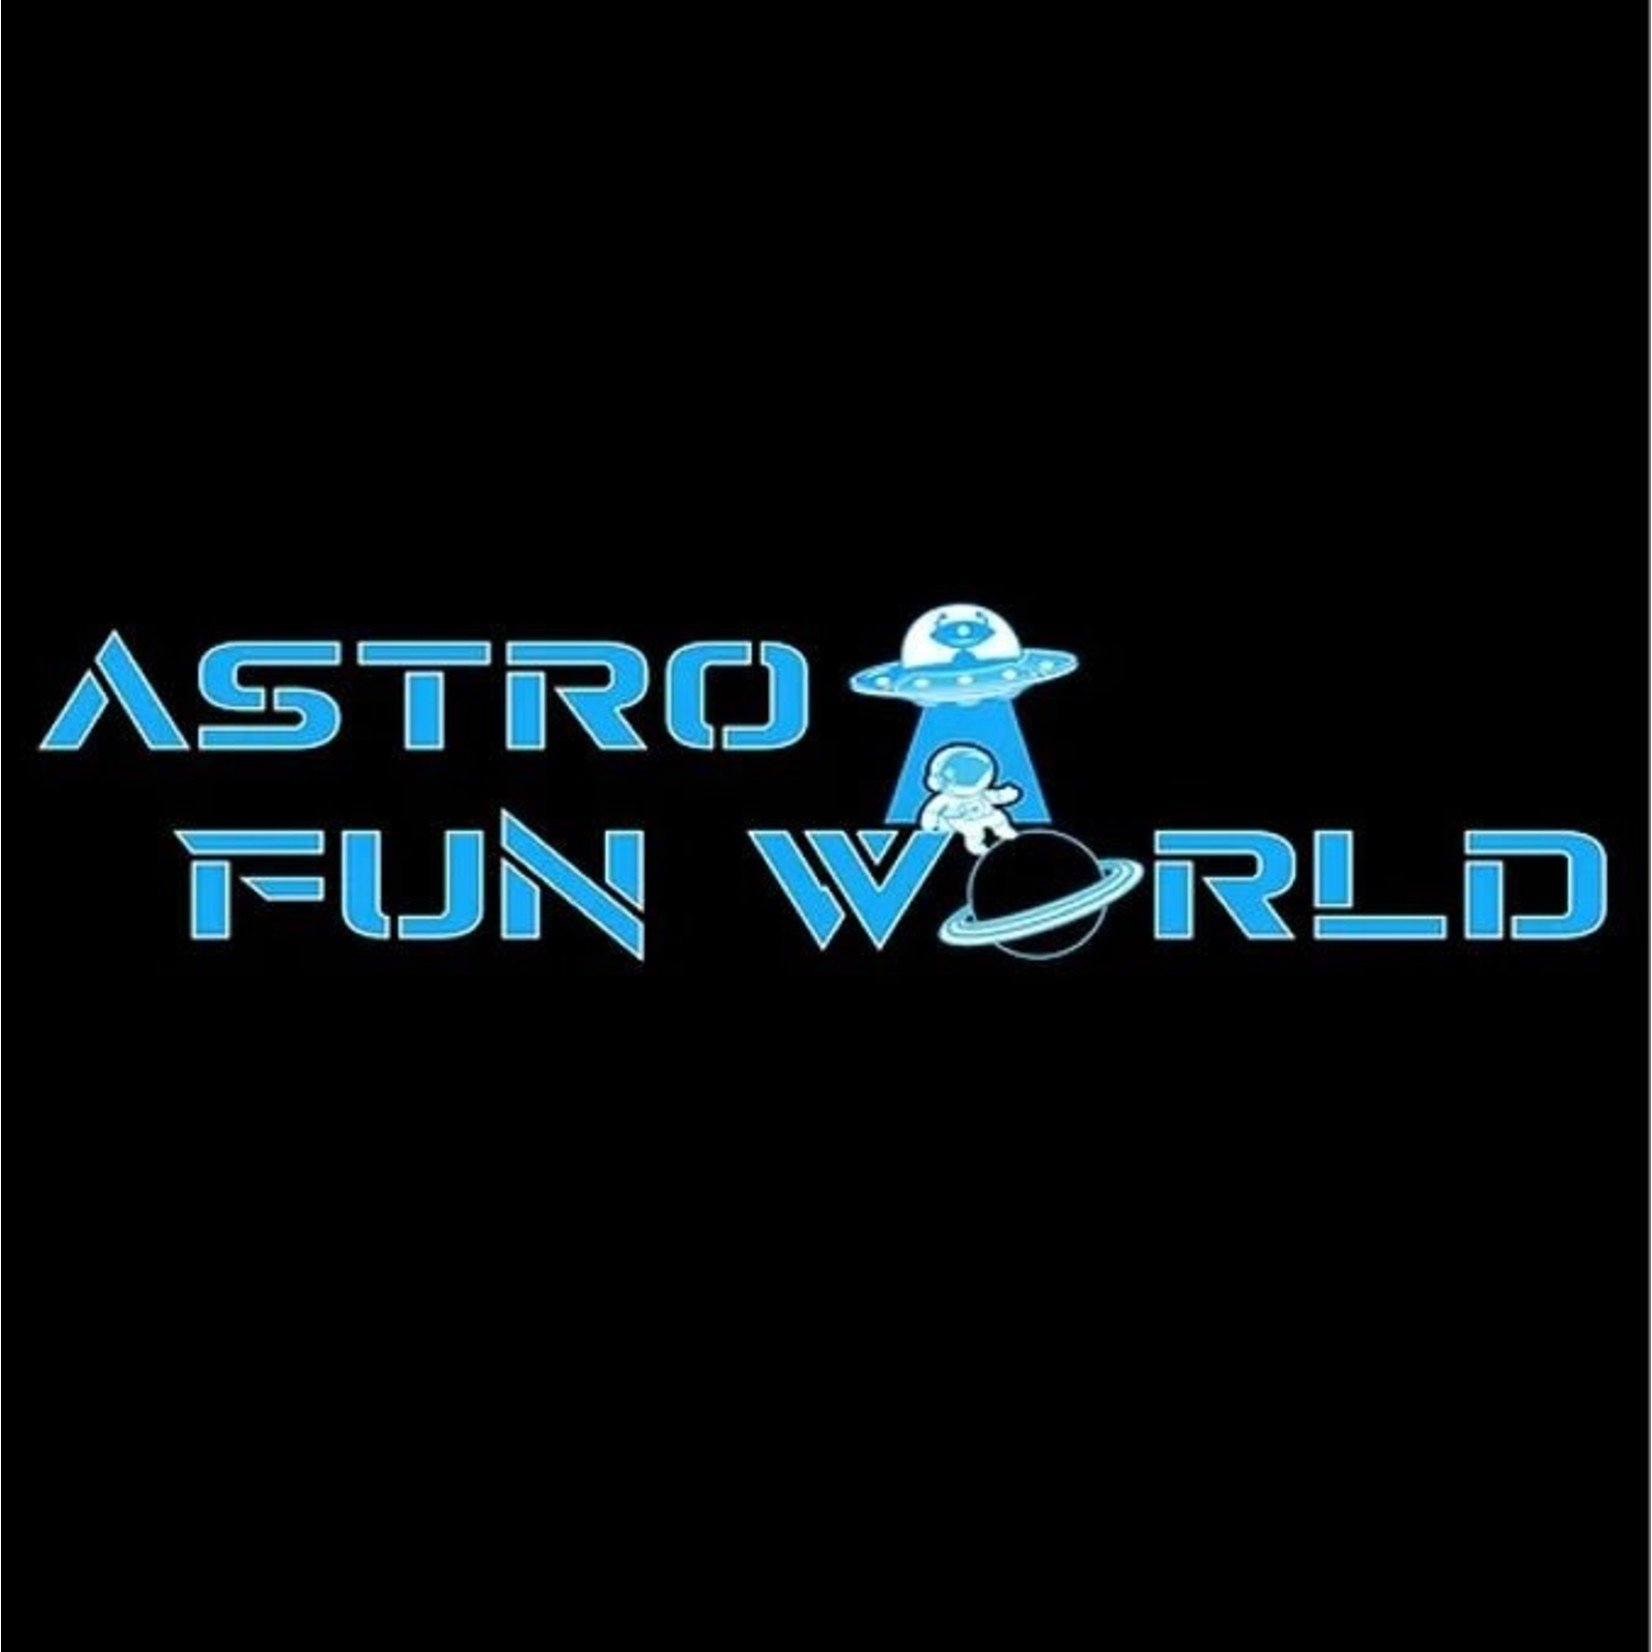 Astro Fun World-Aurora Astro Fun World-Aurora $44.00 All Attraction Bundle for (1)